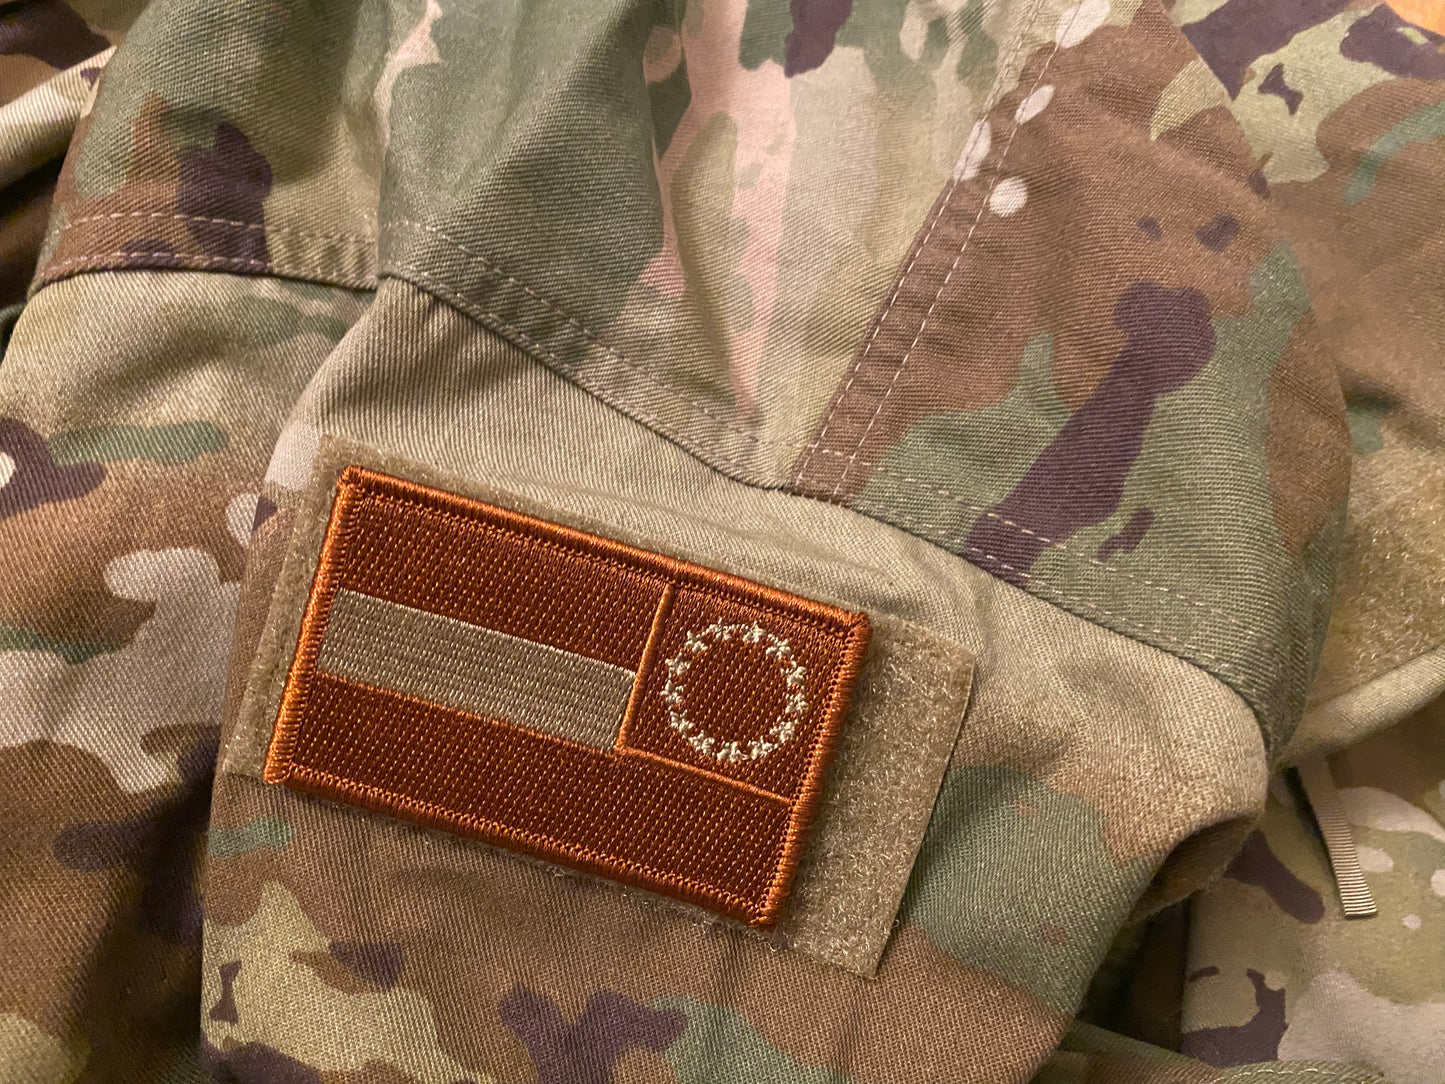 1st National Morale Patch - Subdued Colors